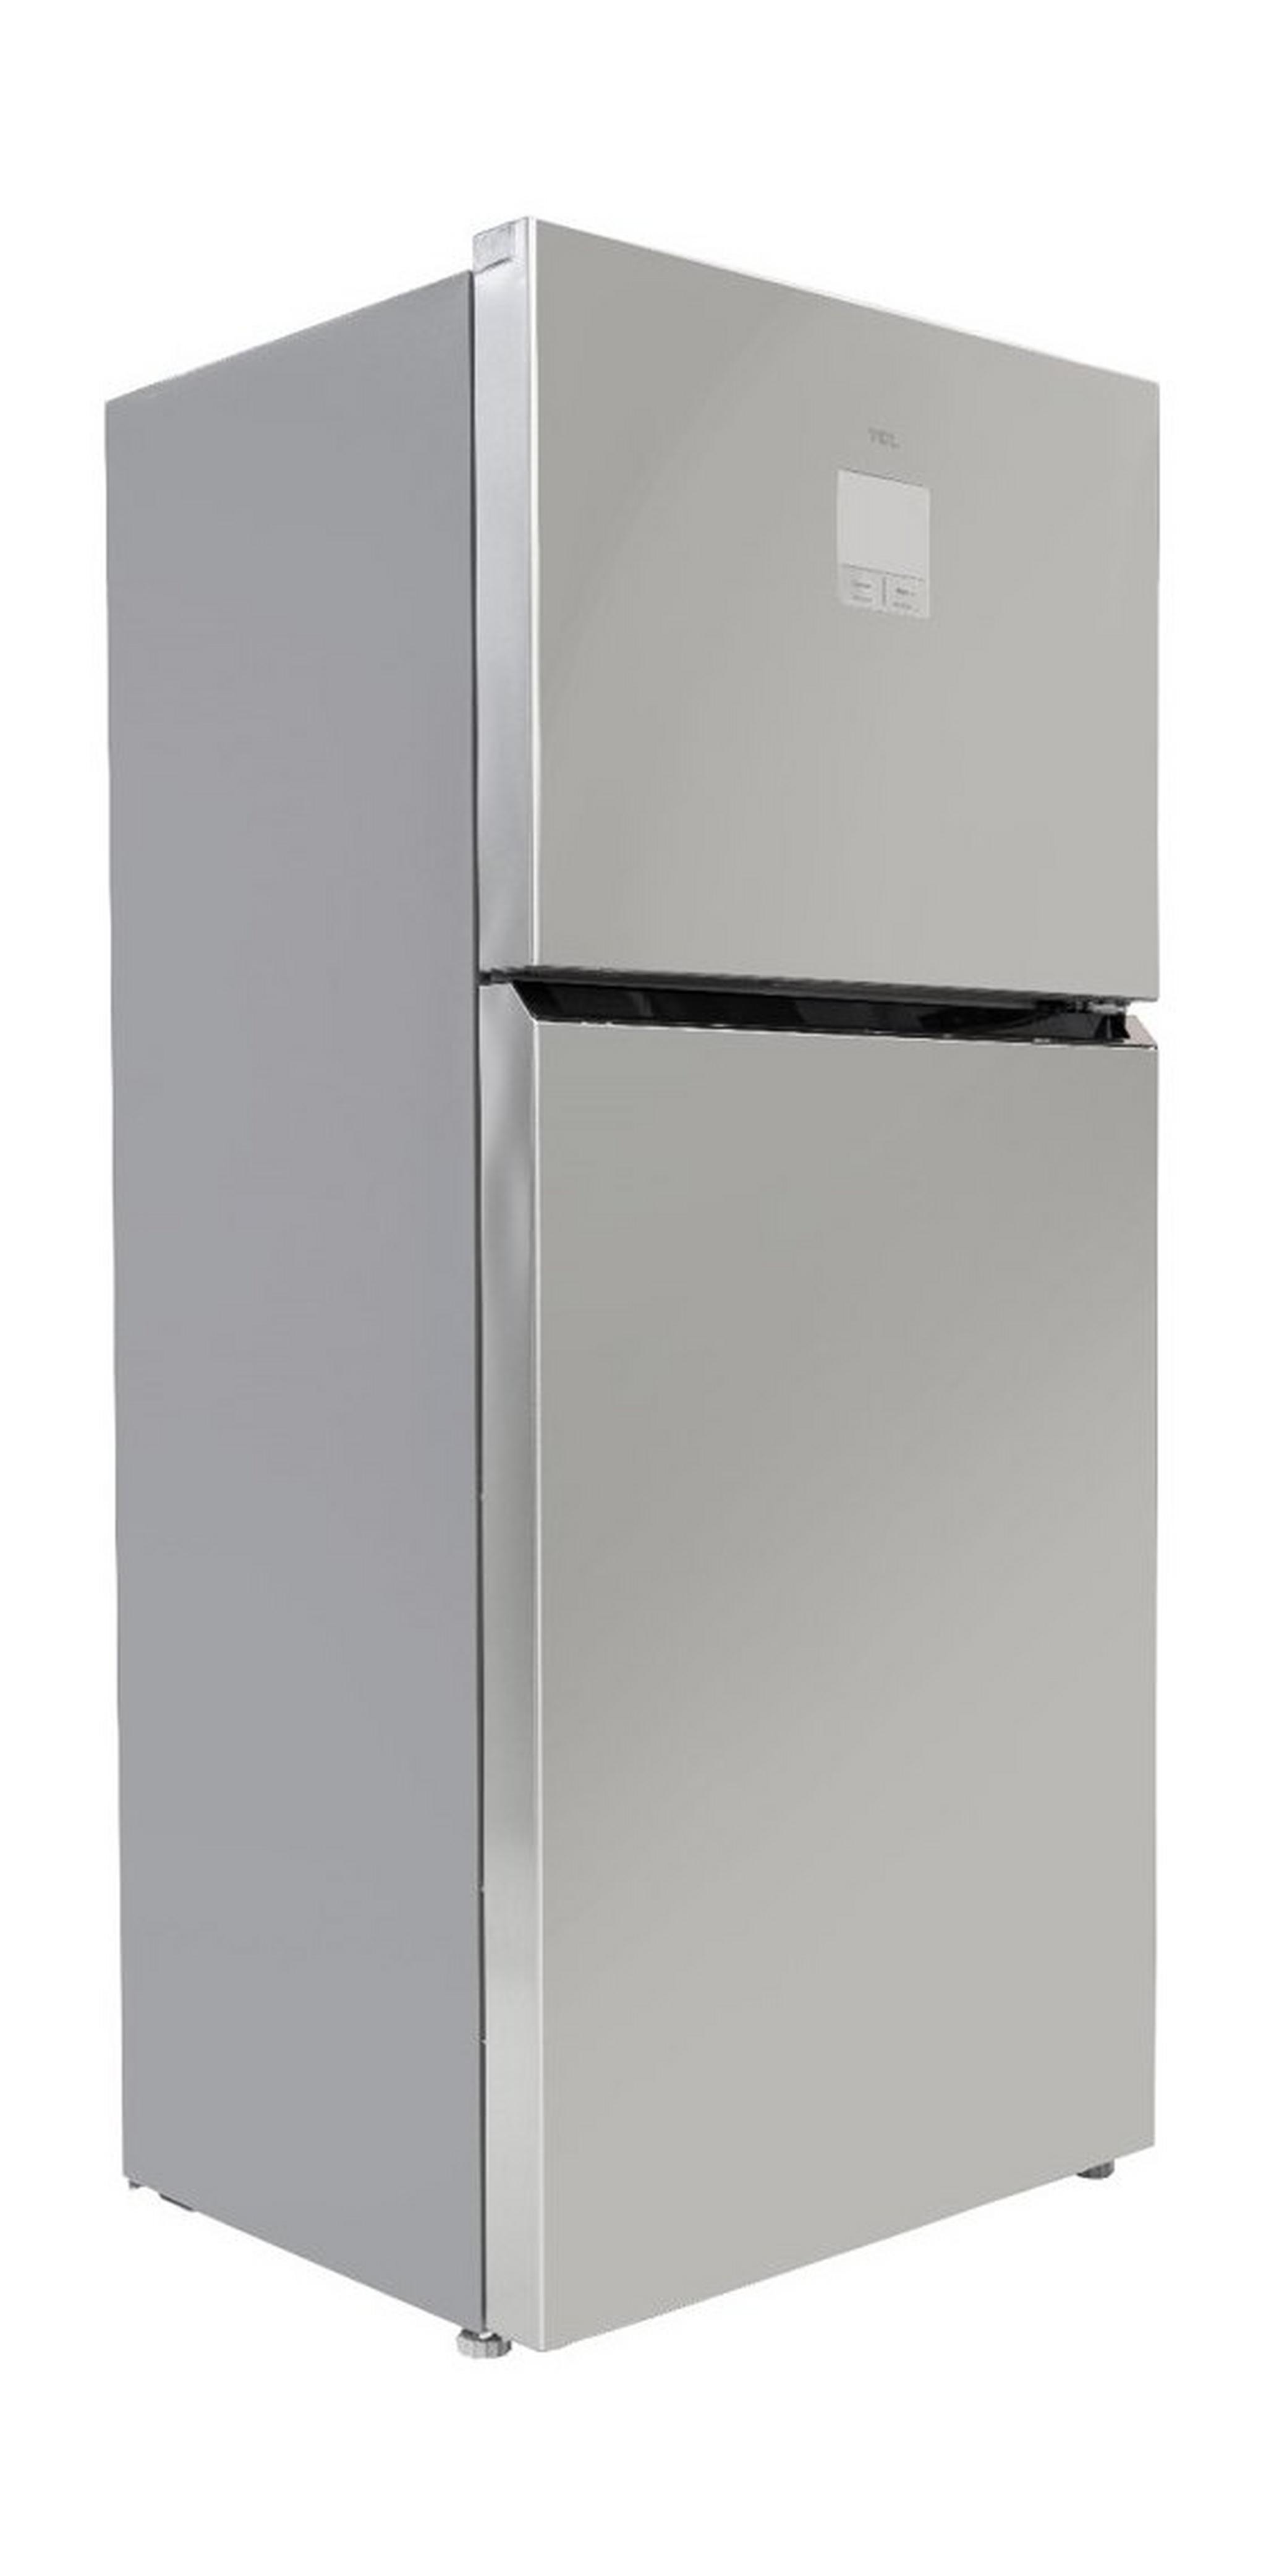 TCL 19 CFT Top Mount Refrigerator (TRF-545WEX) - Stainless Steel